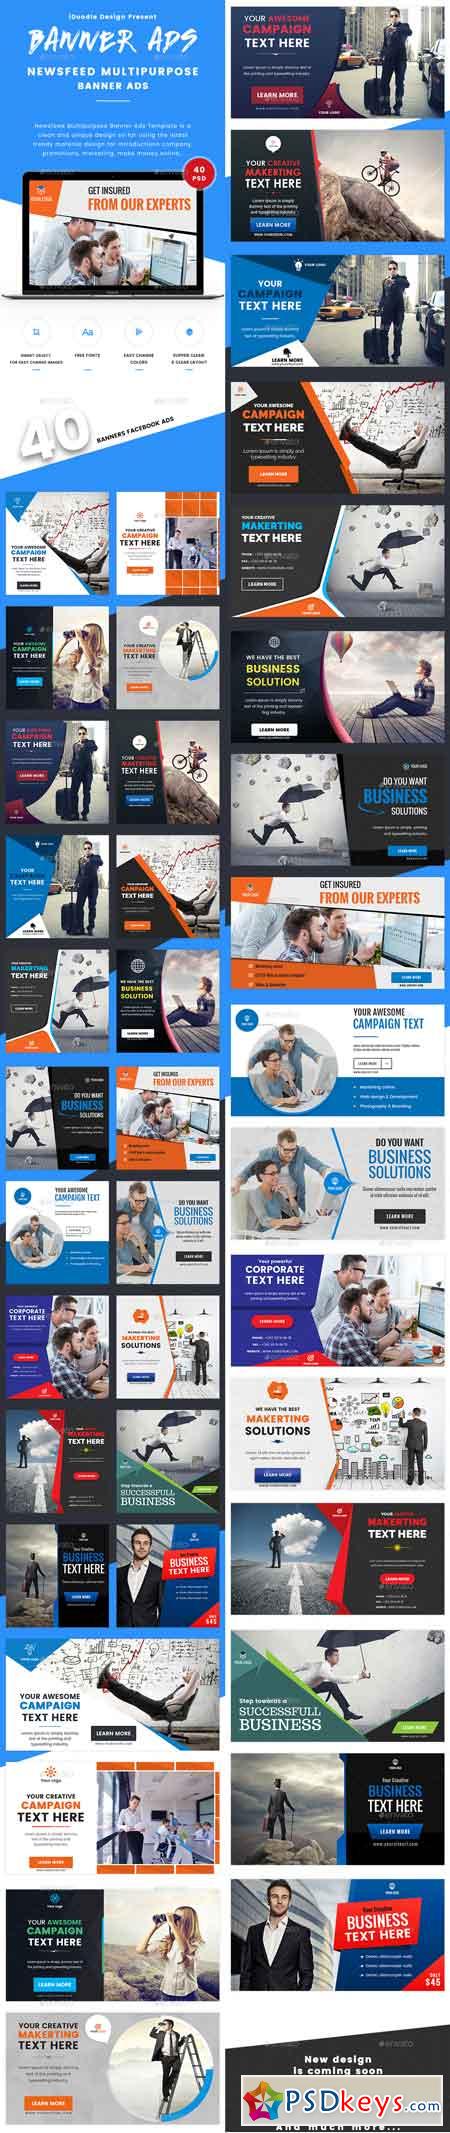 Newsfeed Multipurpose Banner Ads - 40 PSD [02 Size Each] 17049882